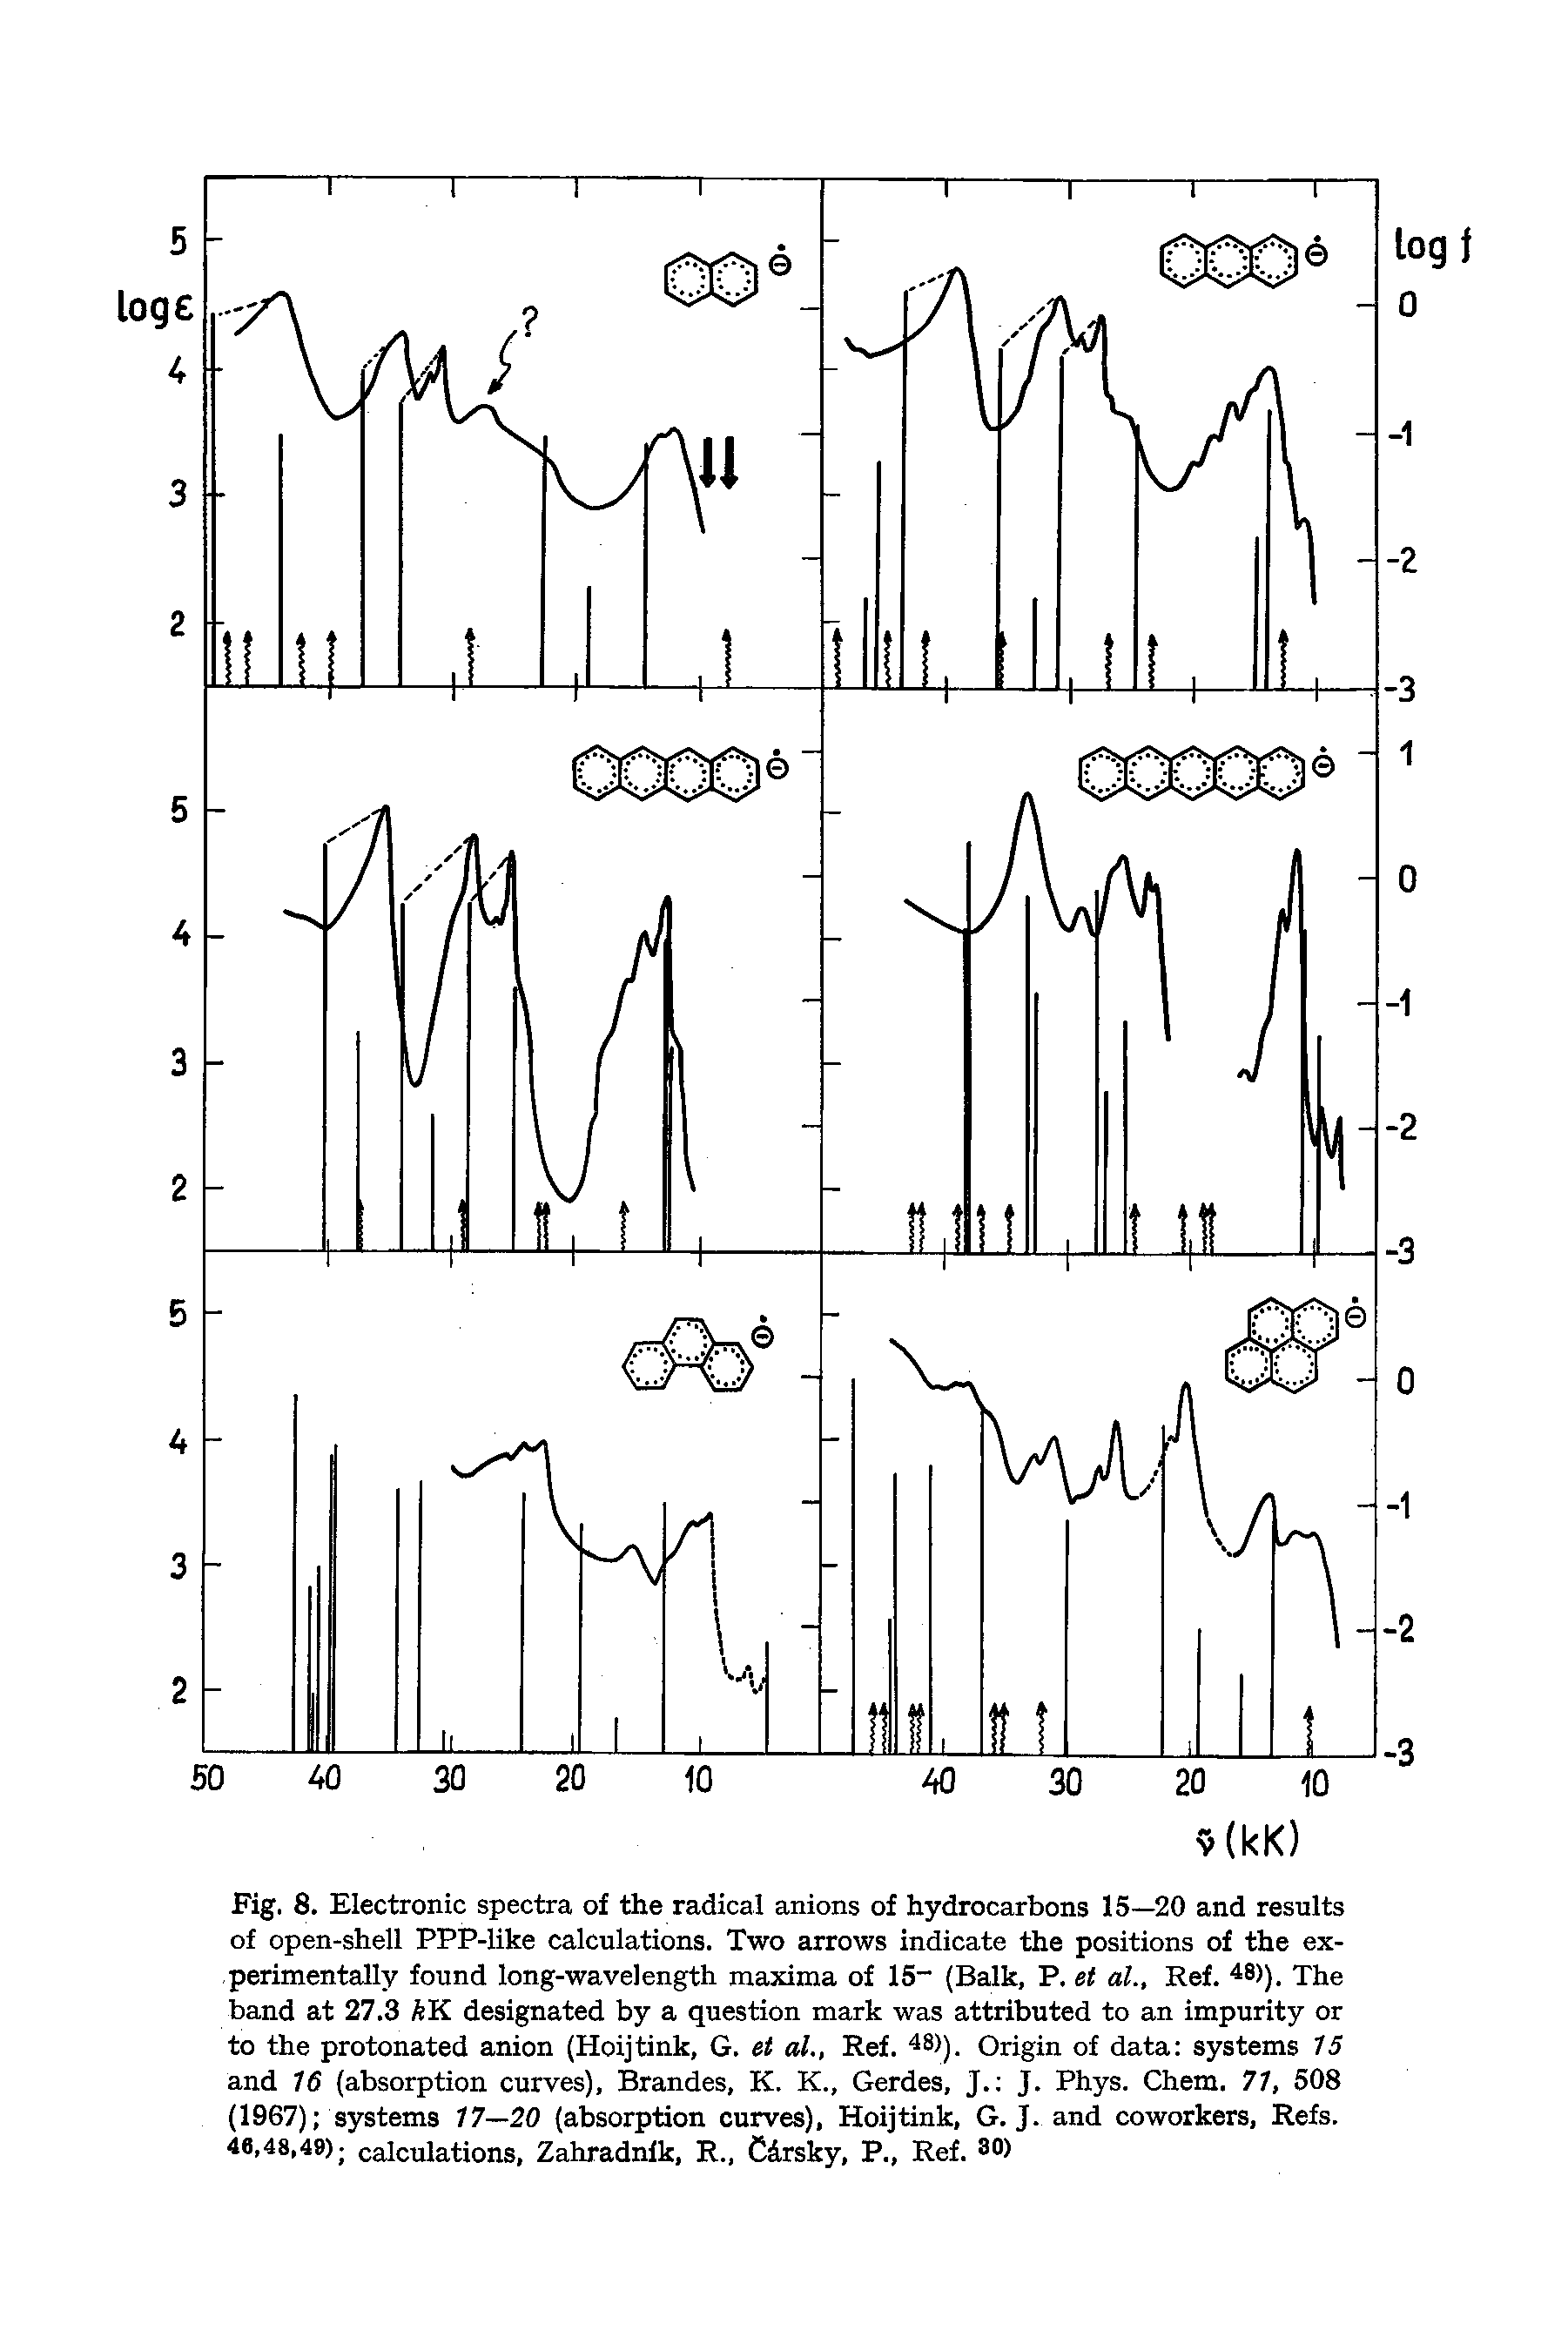 Fig. 8. Electronic spectra of the radical anions of hydrocarbons 15—20 and results of open-shell PPP-like calculations. Two arrows indicate the positions of the experimentally found long-wavelength maxima of 15 (Balk, P. et al.. Ref. 8)). The band at 27.3 AK designated by a question mark was attributed to an impurity or to the protonated anion (Hoijtink, G. et al., Ref. 48)). Origin of data systems 15 and 16 (absorption curves), Brandes, K. K., Gerdes, J. J. Phys. Chem. 71, 508 (1967) systems 17—20 (absorption curves), Hoijtink, G. J. and coworkers. Refs. 48,48,49) calculations, Zahradnik, R., Cdrsky, P., Ref. 30)...